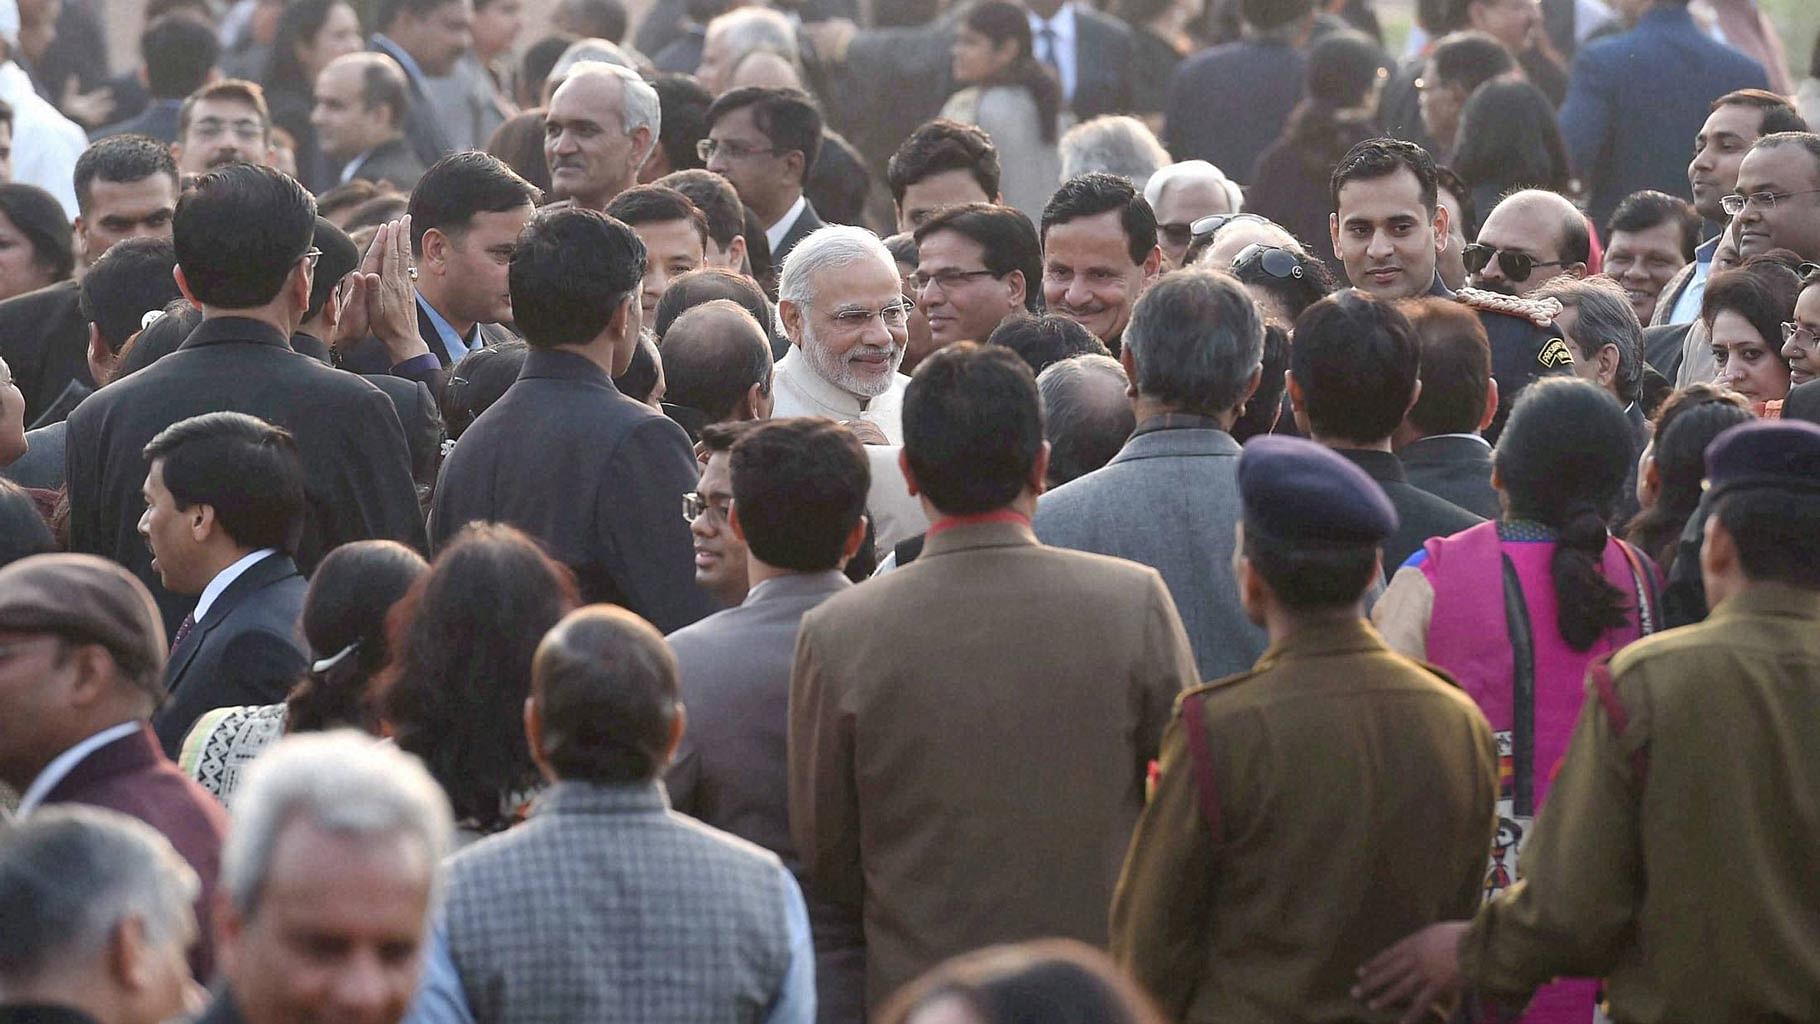 PM Modi meeting invitees during an At-Home reception hosted by President Pranab Mukherjee on the occasion of 67th Republic Day at Rashtrapati Bhavan, New Delhi on Tuesday. (Photo: PTI)